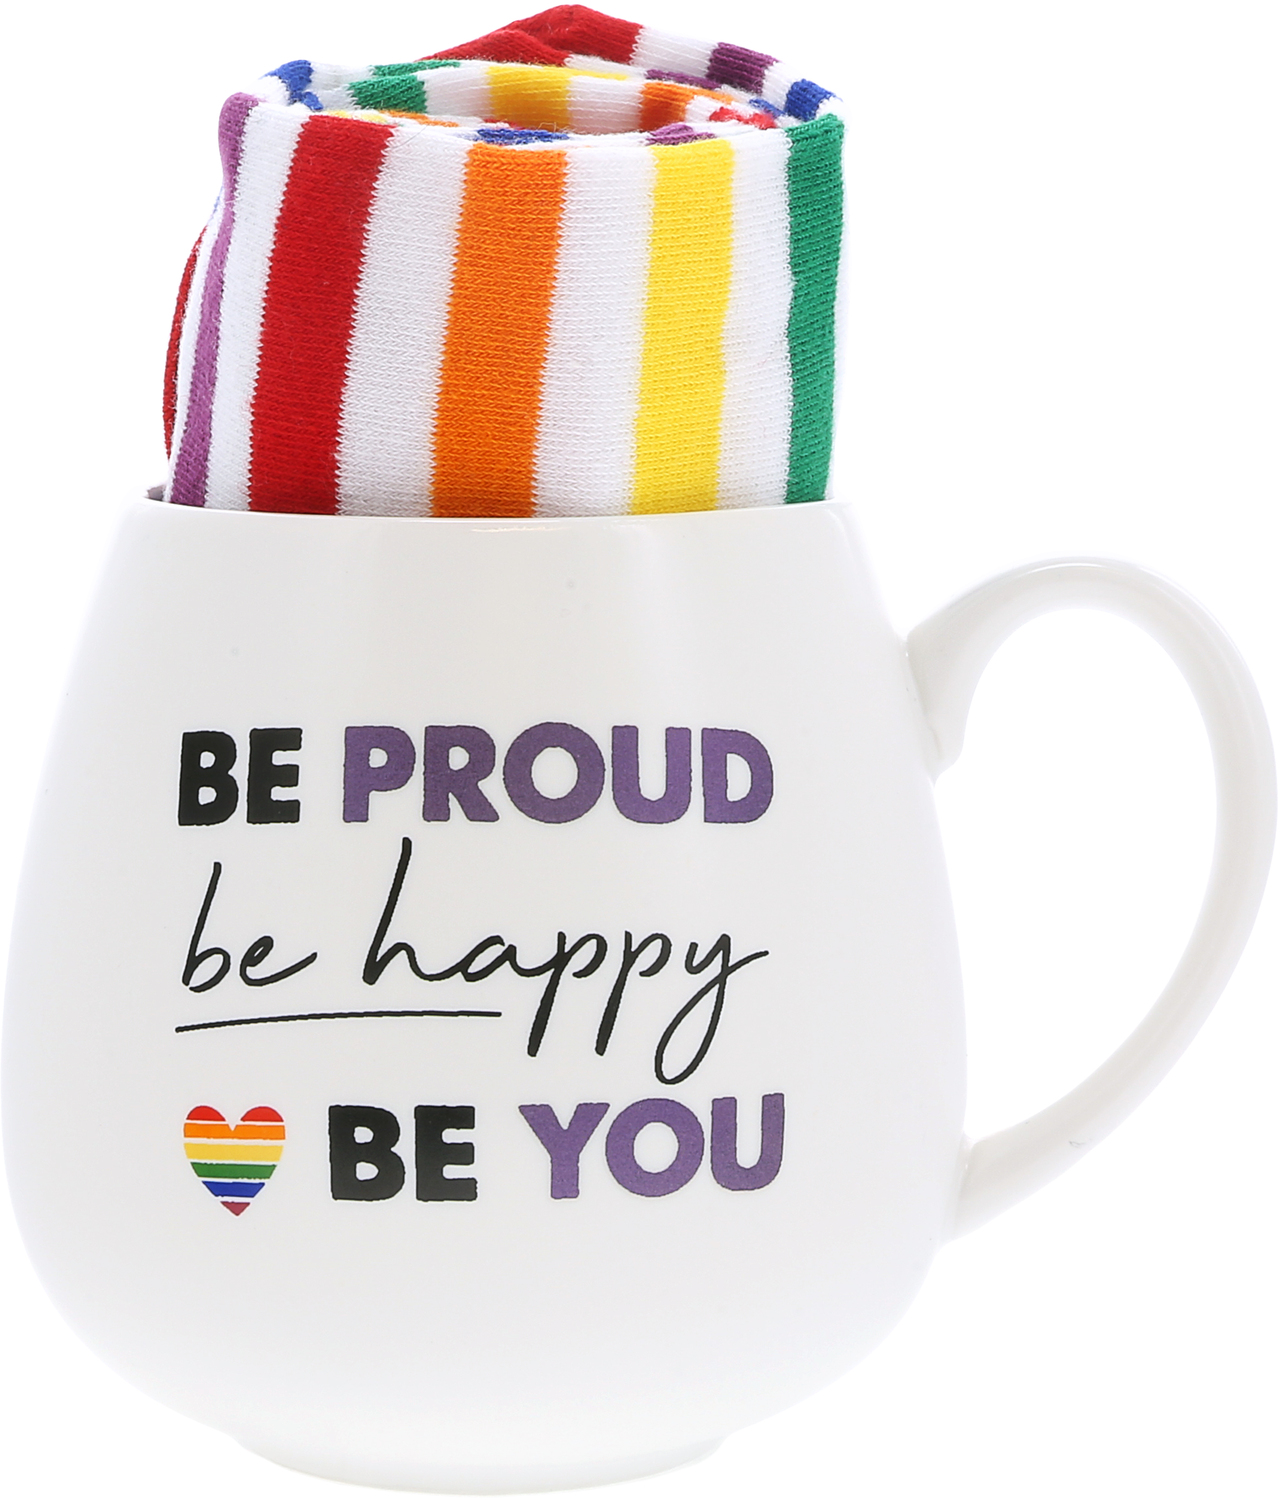 Be You by Warm & Toe-sty - Be You - 15.5 oz Mug and Sock Set